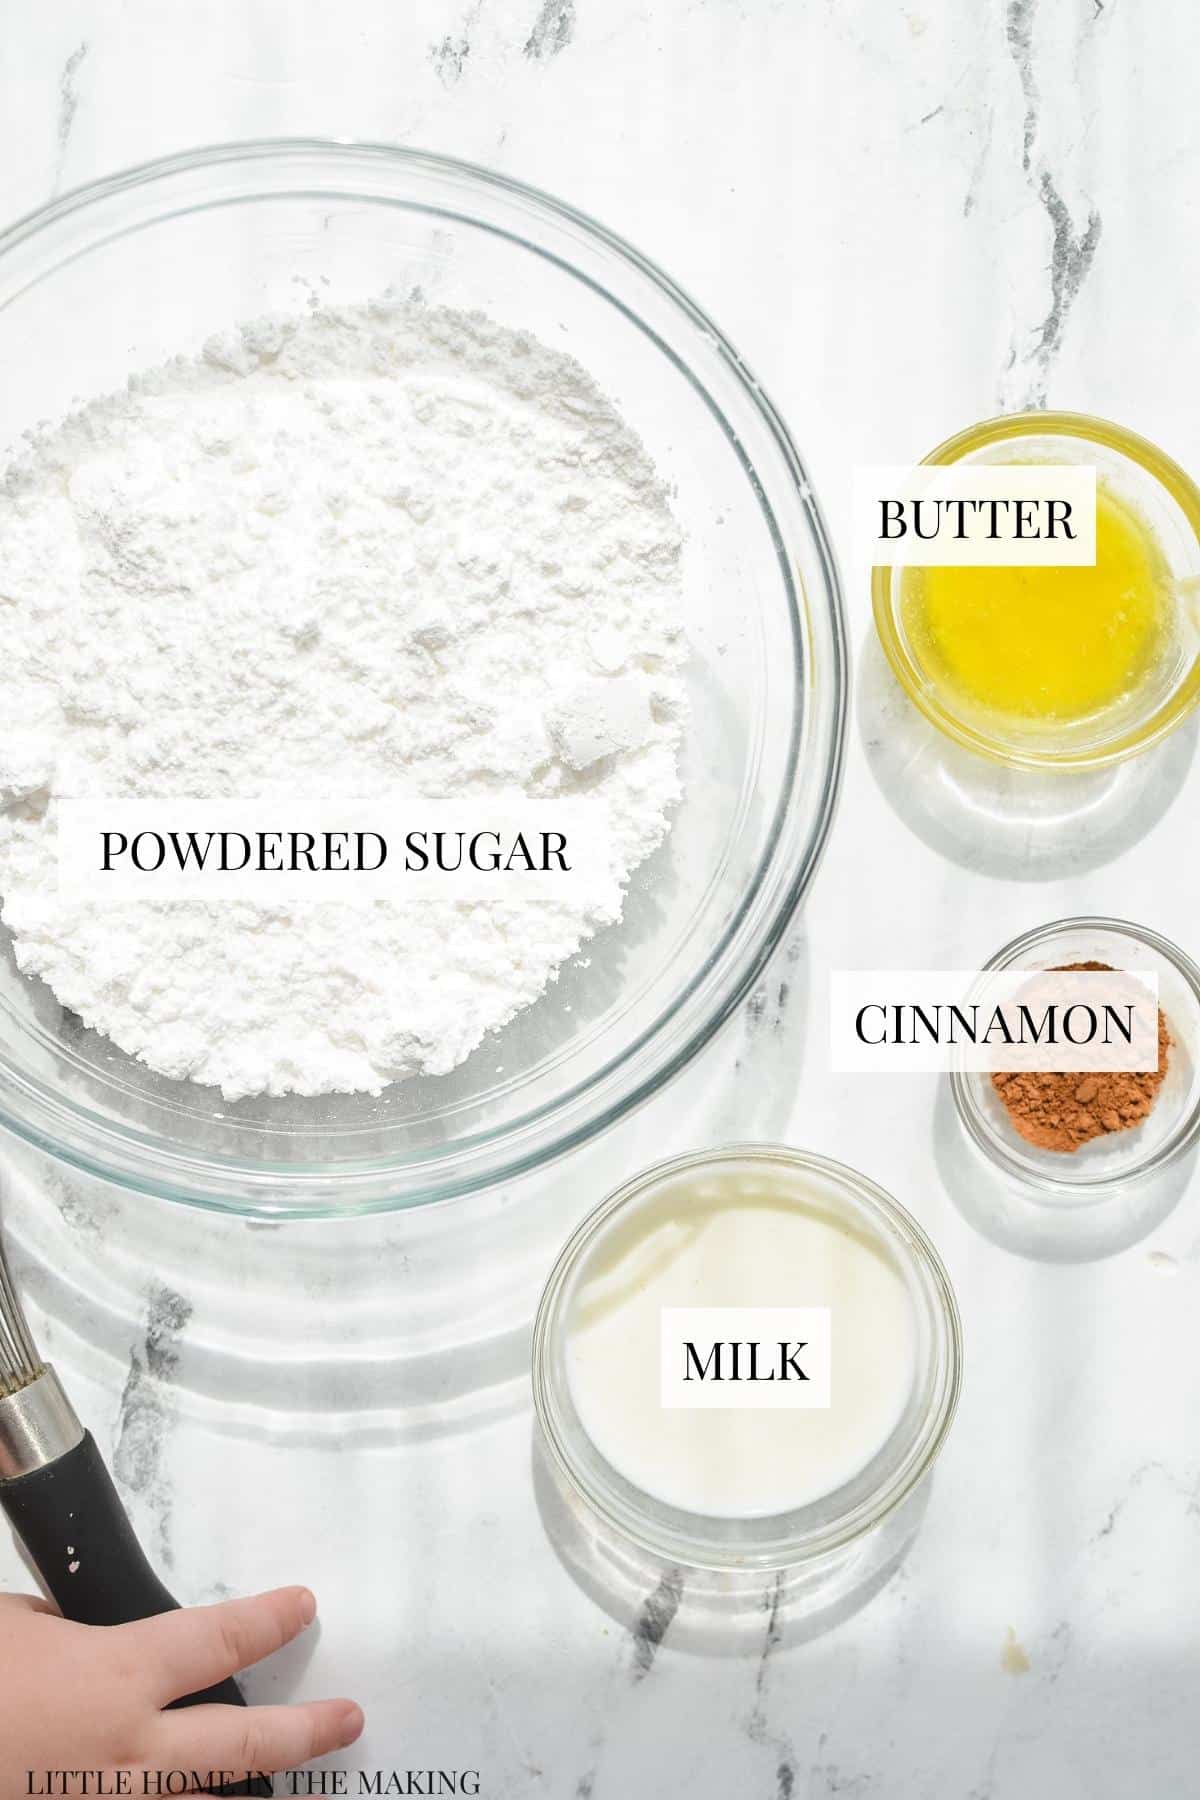 The ingredients needed to make a simple frosting, including powdered sugar and milk.